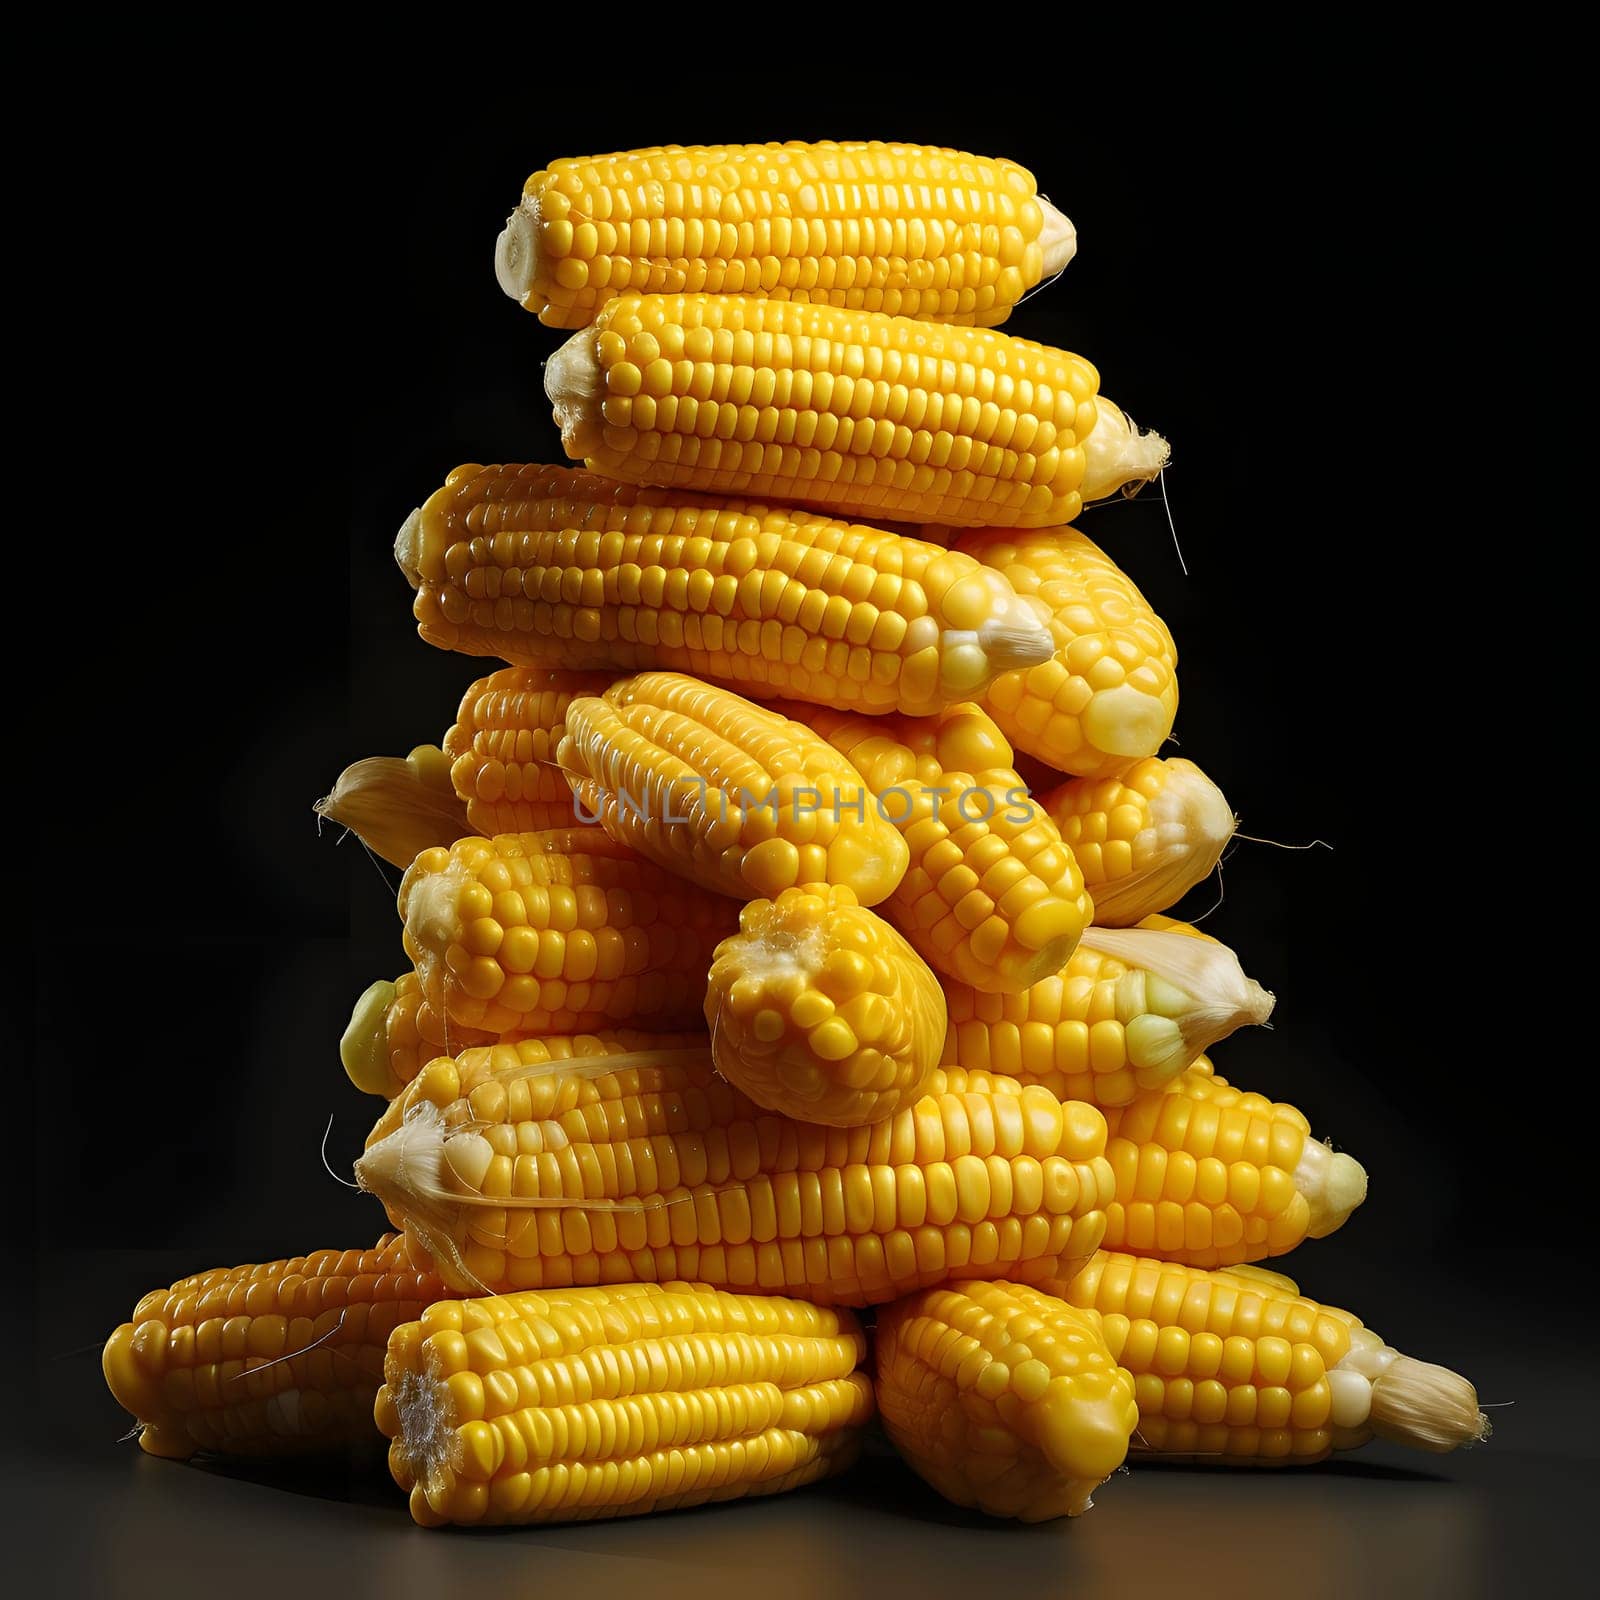 Yellow corn cobs stacked on a black isolated background. Corn as a dish of thanksgiving for the harvest. An atmosphere of joy and celebration.